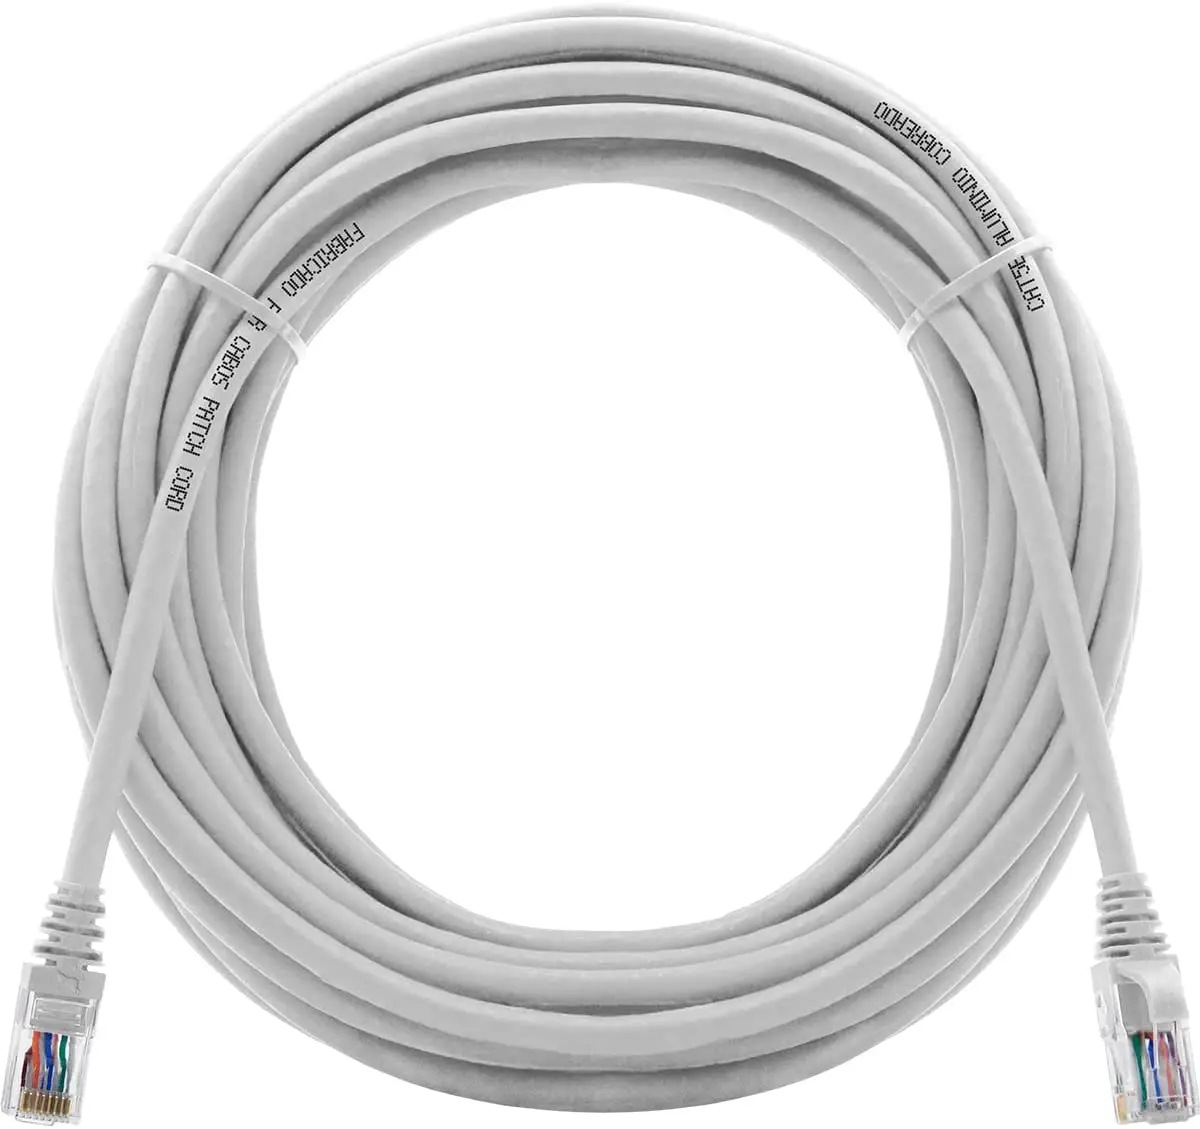 

NEW Utp Cat5e Ethernet Cable 4 Pairs Lan Rj45 30 Meters White